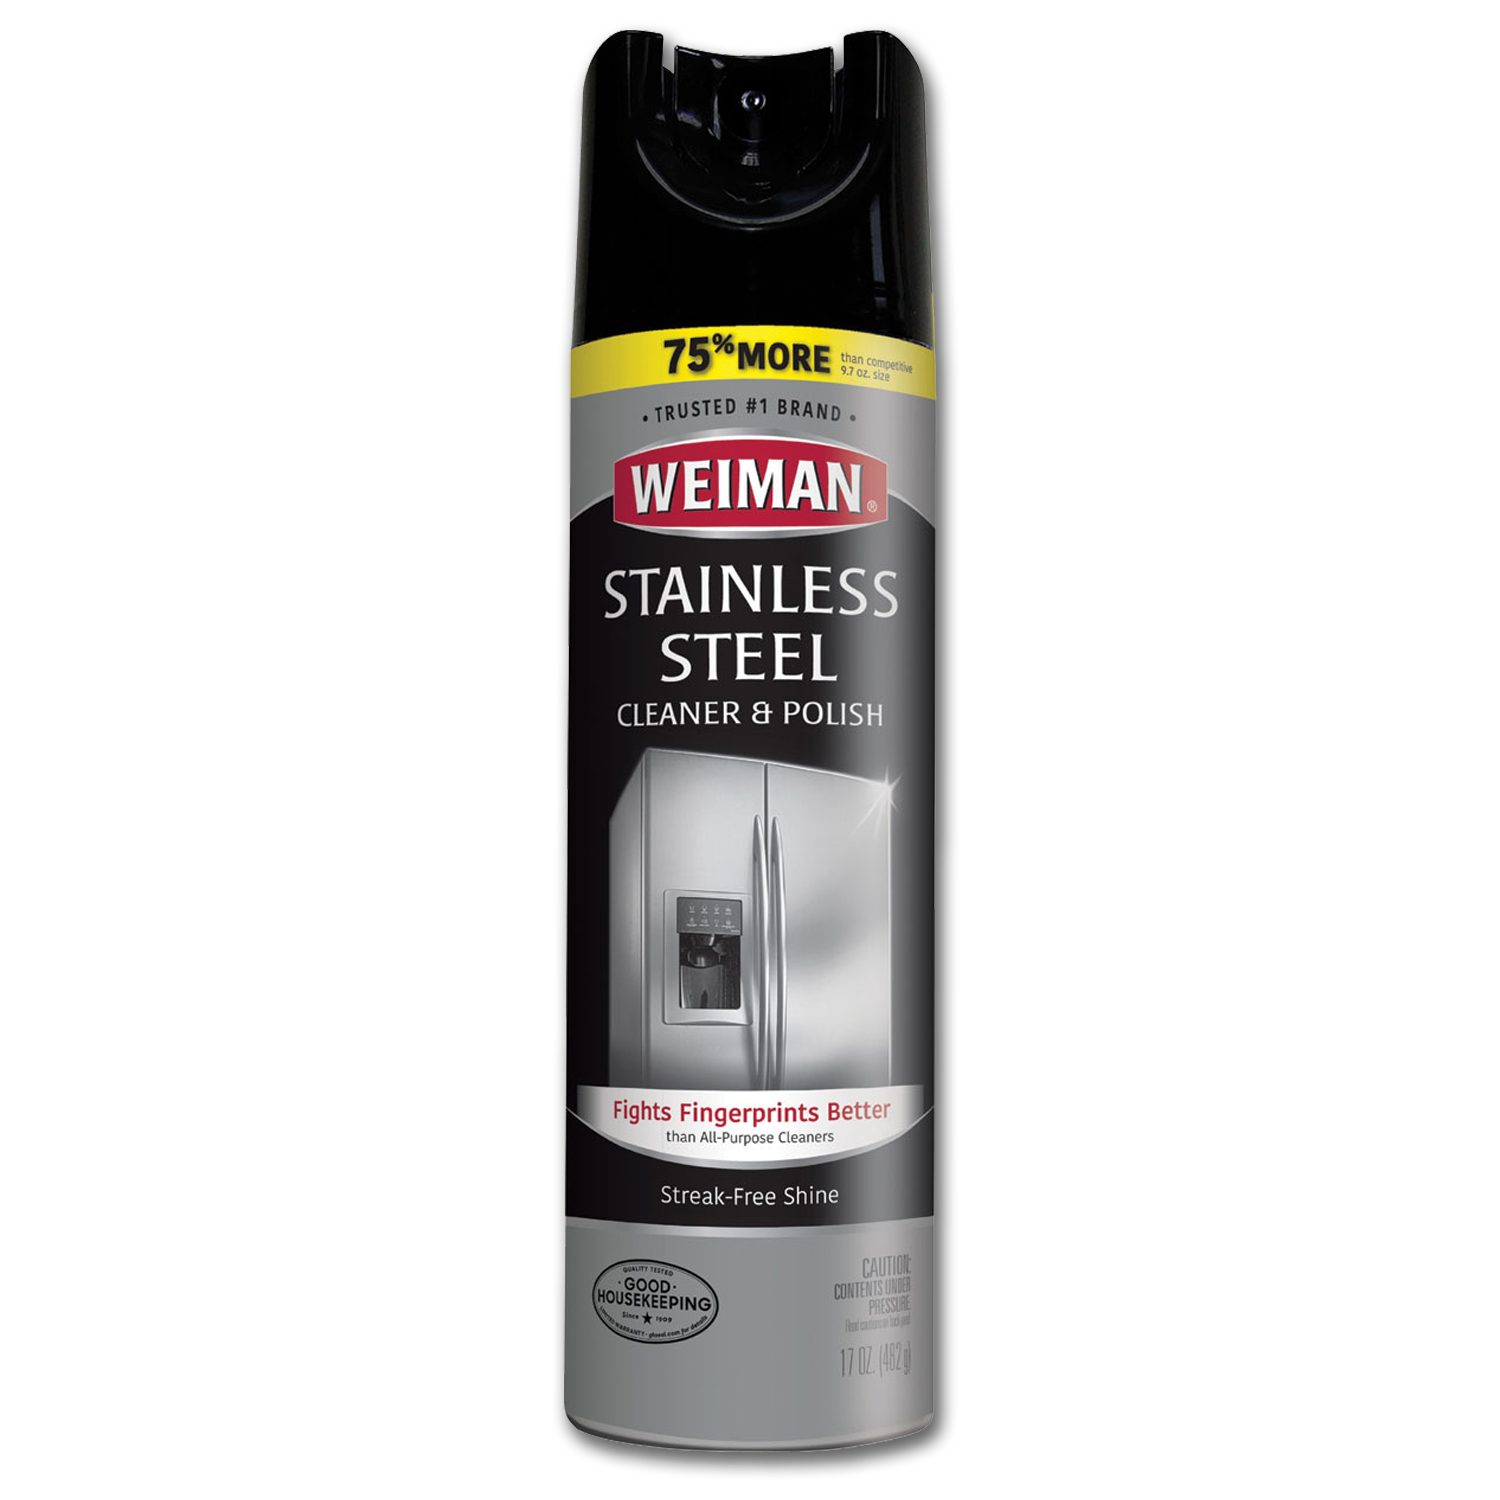 weiman stainless steel cleaner coupons